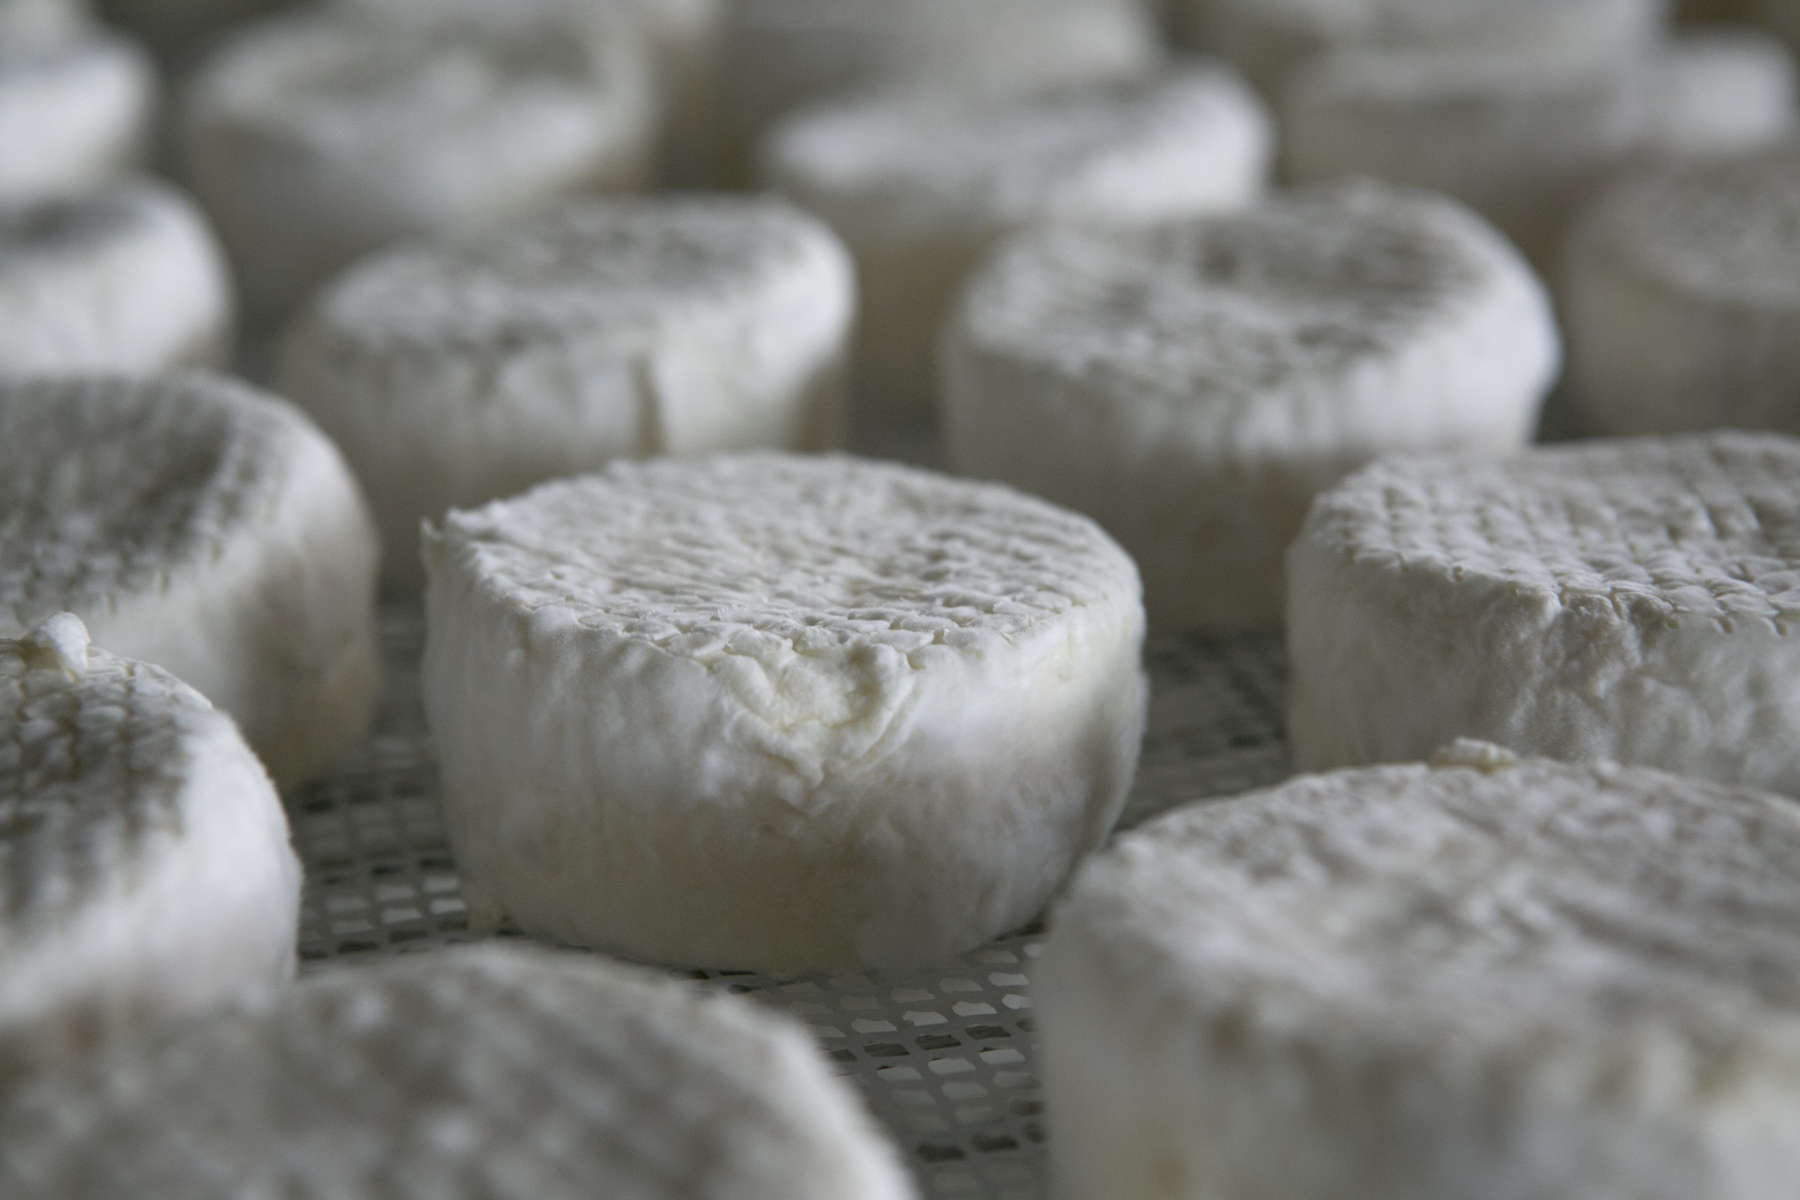 Wheels of Adelle cheese age at Ancient Heritage Dairy in Portland in one of their cheese caves, February 10, 2015. This award-winning cheese is a bloomy-rind cheese made with pasteurized cow and sheep's milk. Kristyna Wentz-Graff/Staff